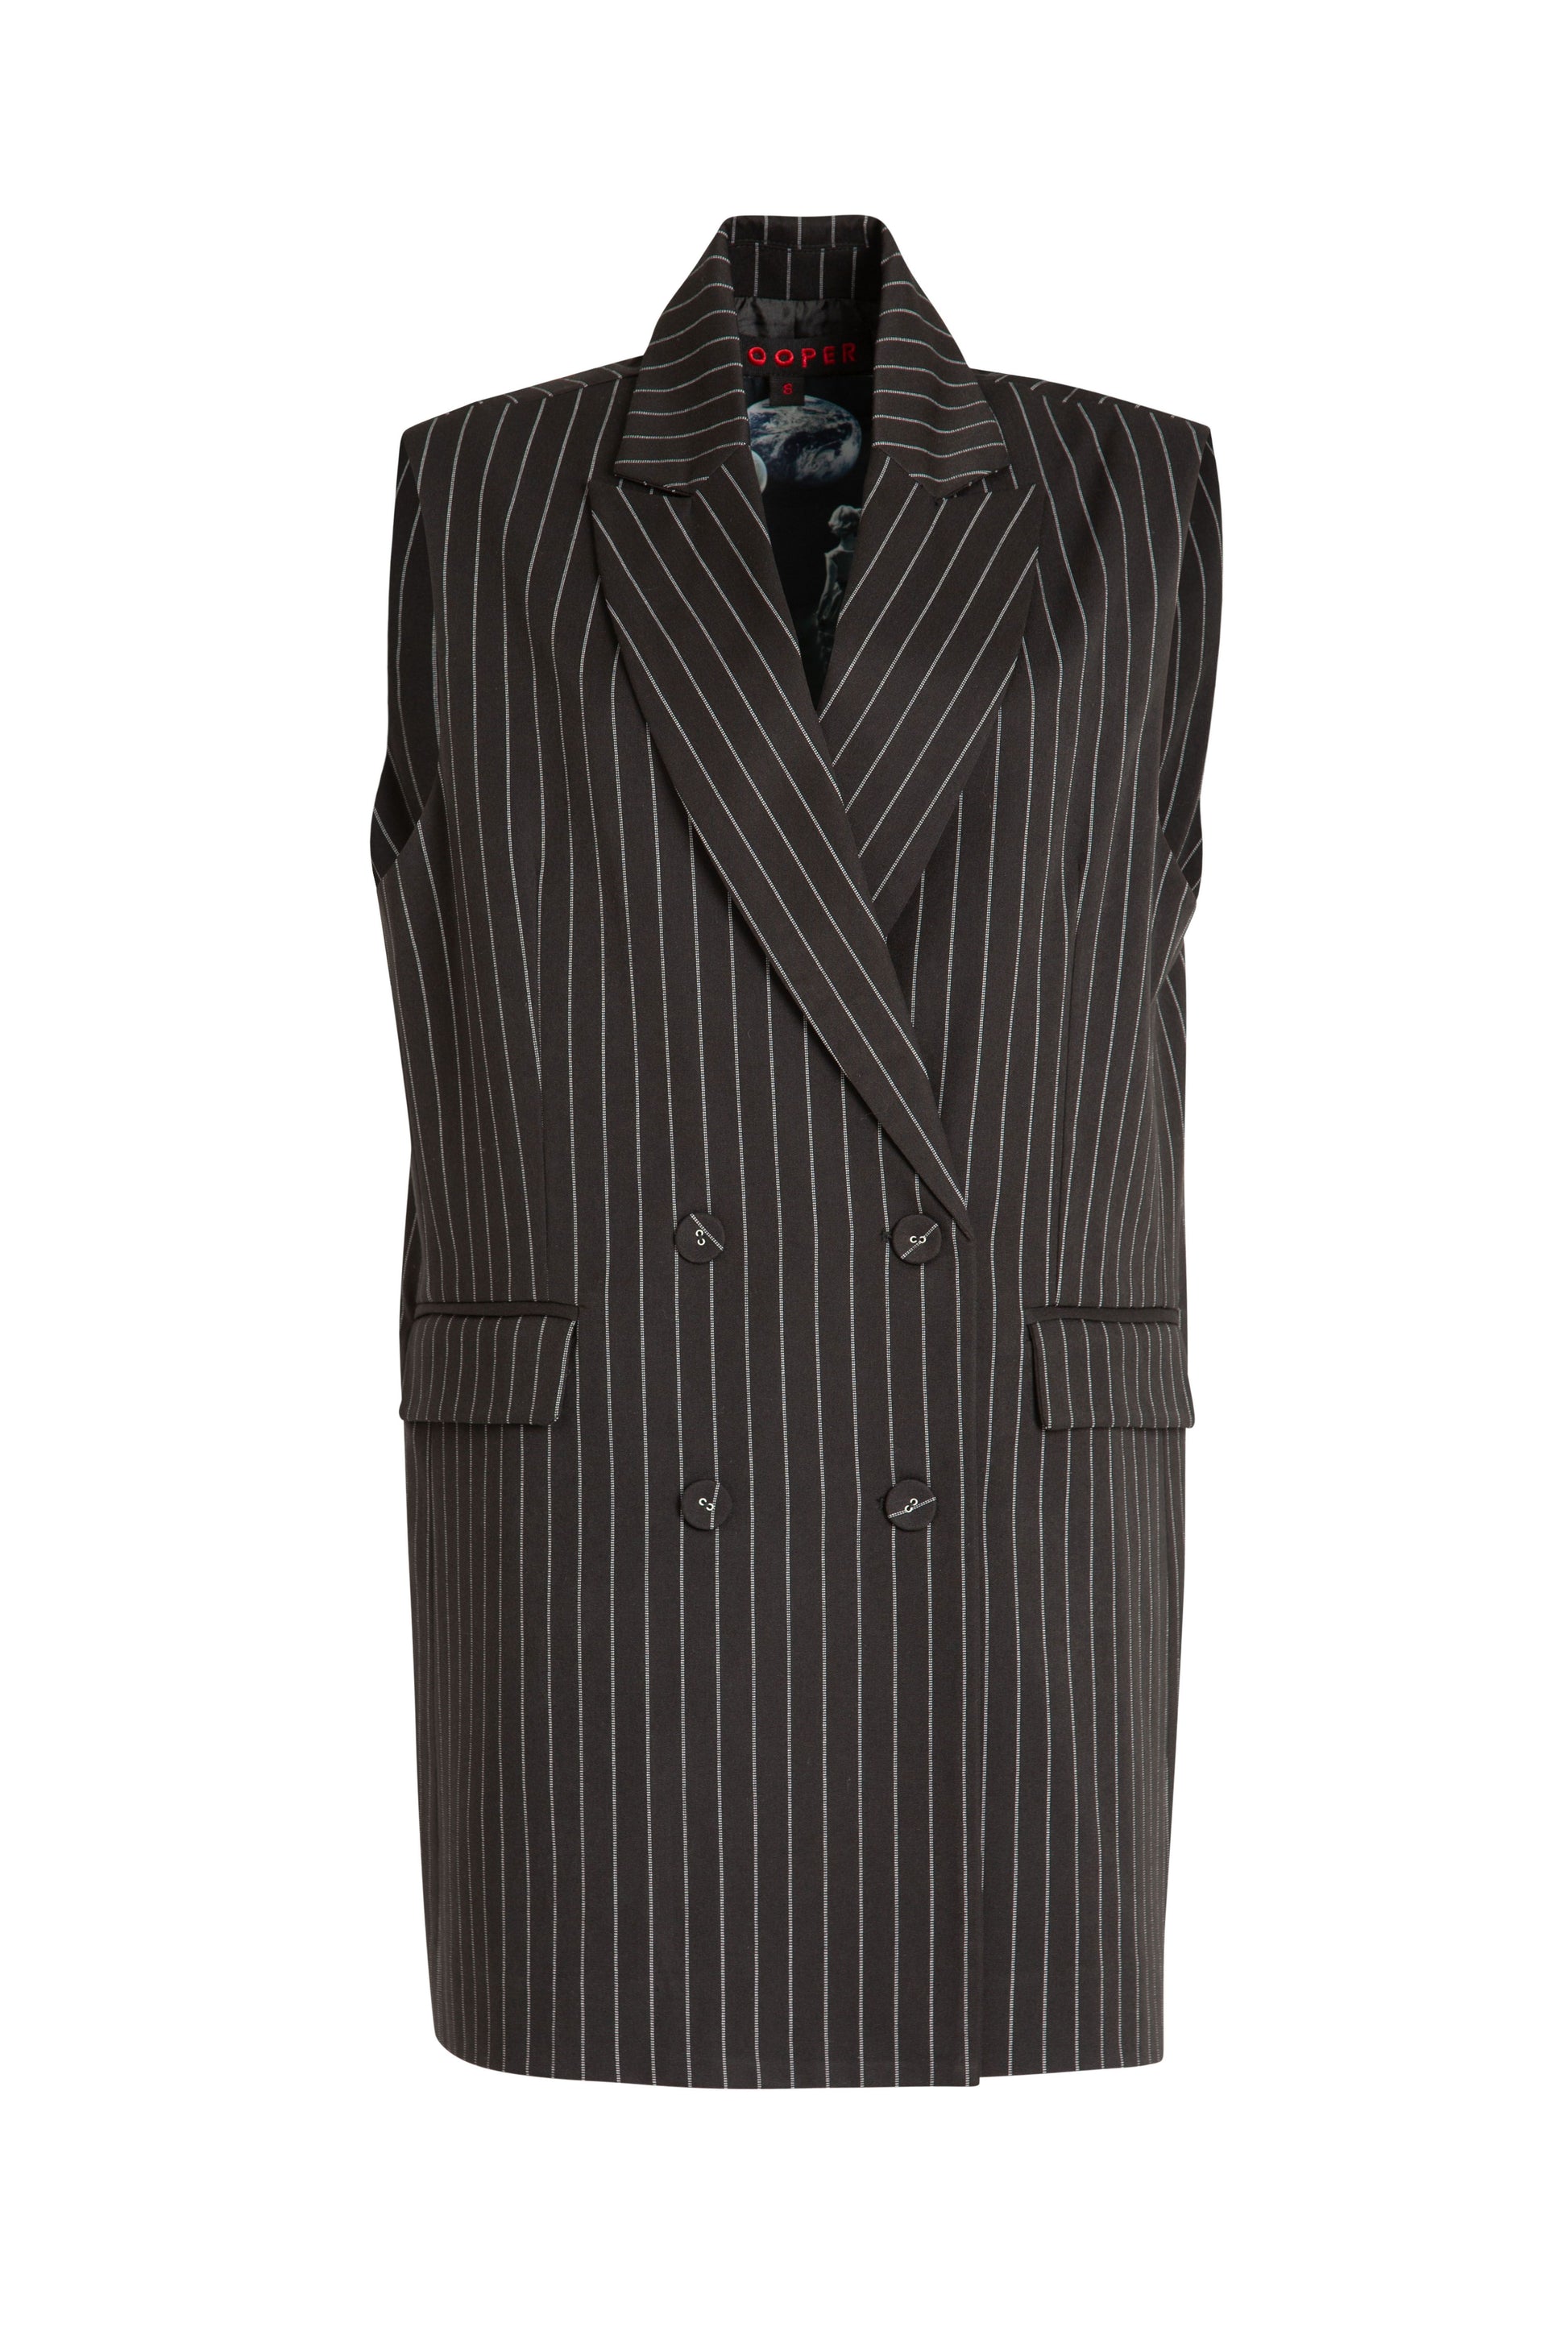 COOPER GET DOWN TO BUSINESS WAISTCOAT - BLACK PINSTRIPE - THE VOGUE STORE